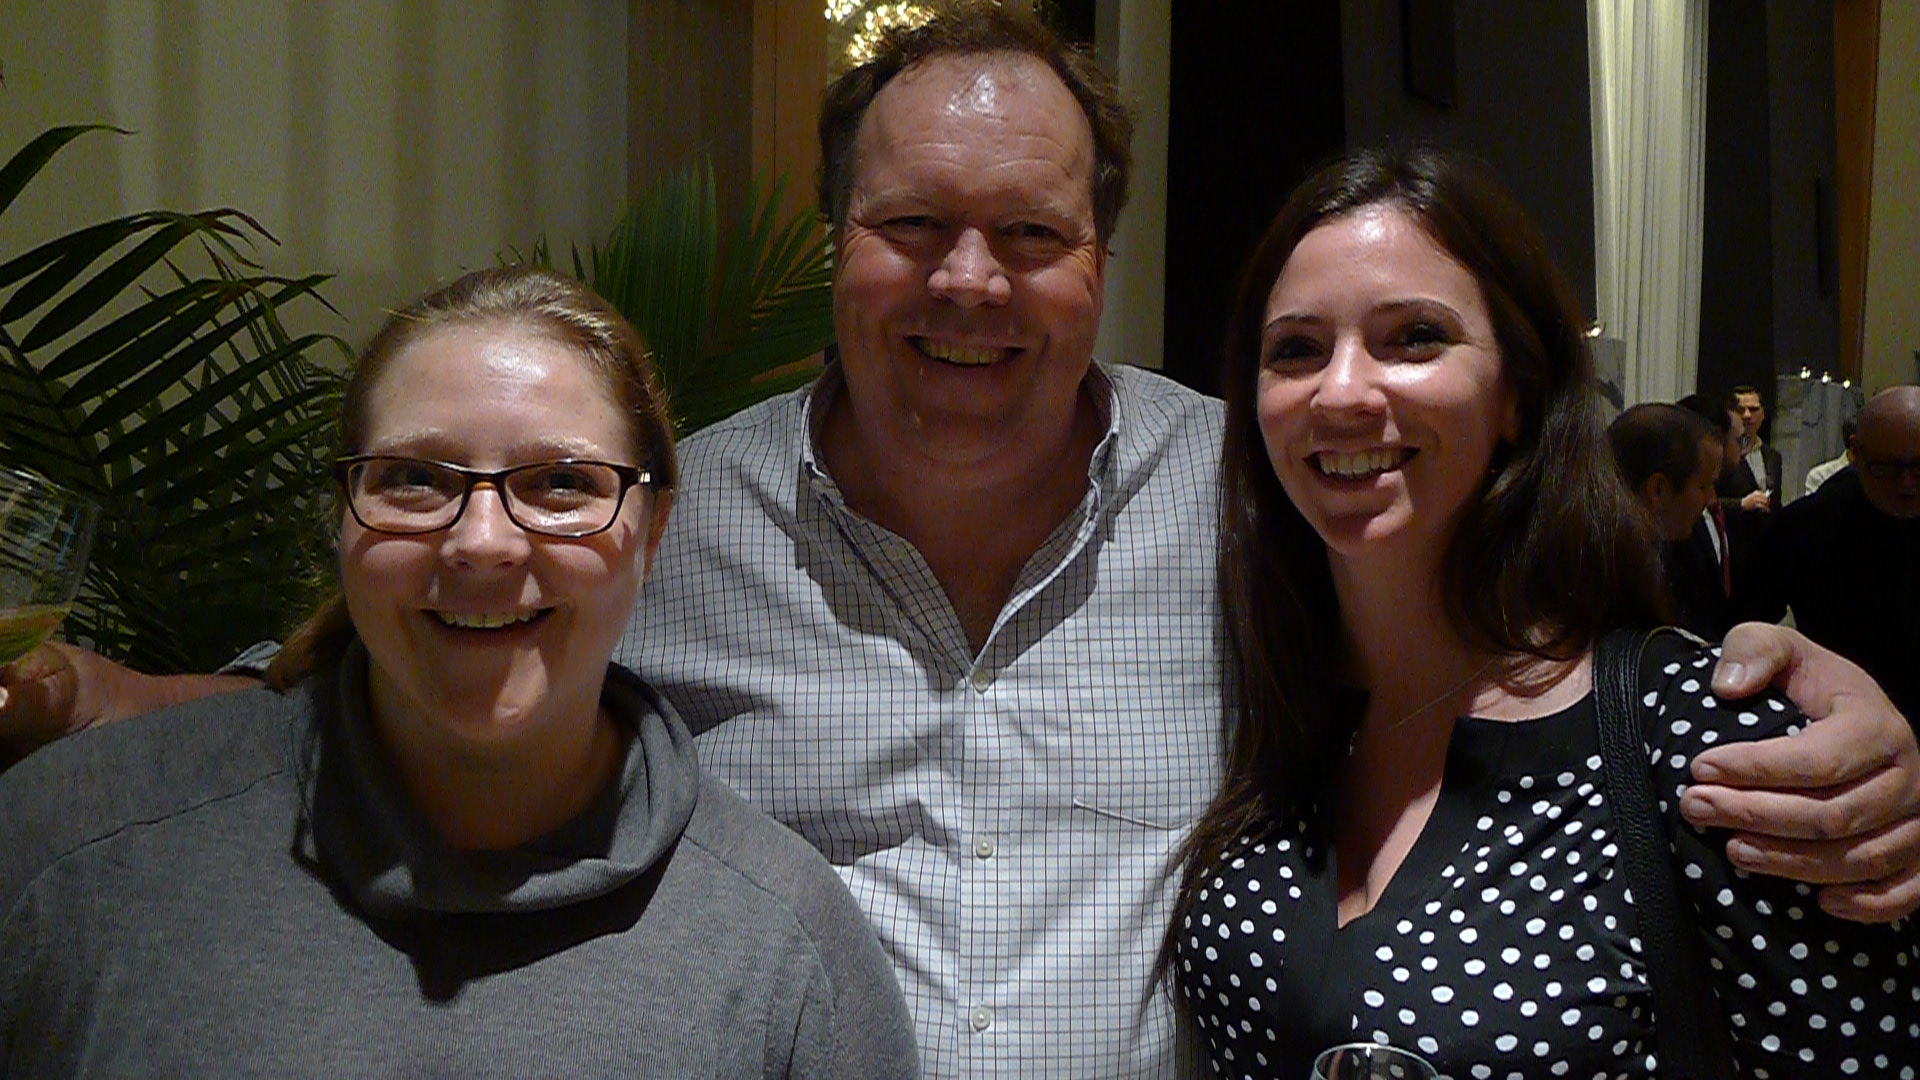 Katy Moore (The Case For Wine), Winemaker Norman Hardie, and Brae Mason (Langdon Hall).